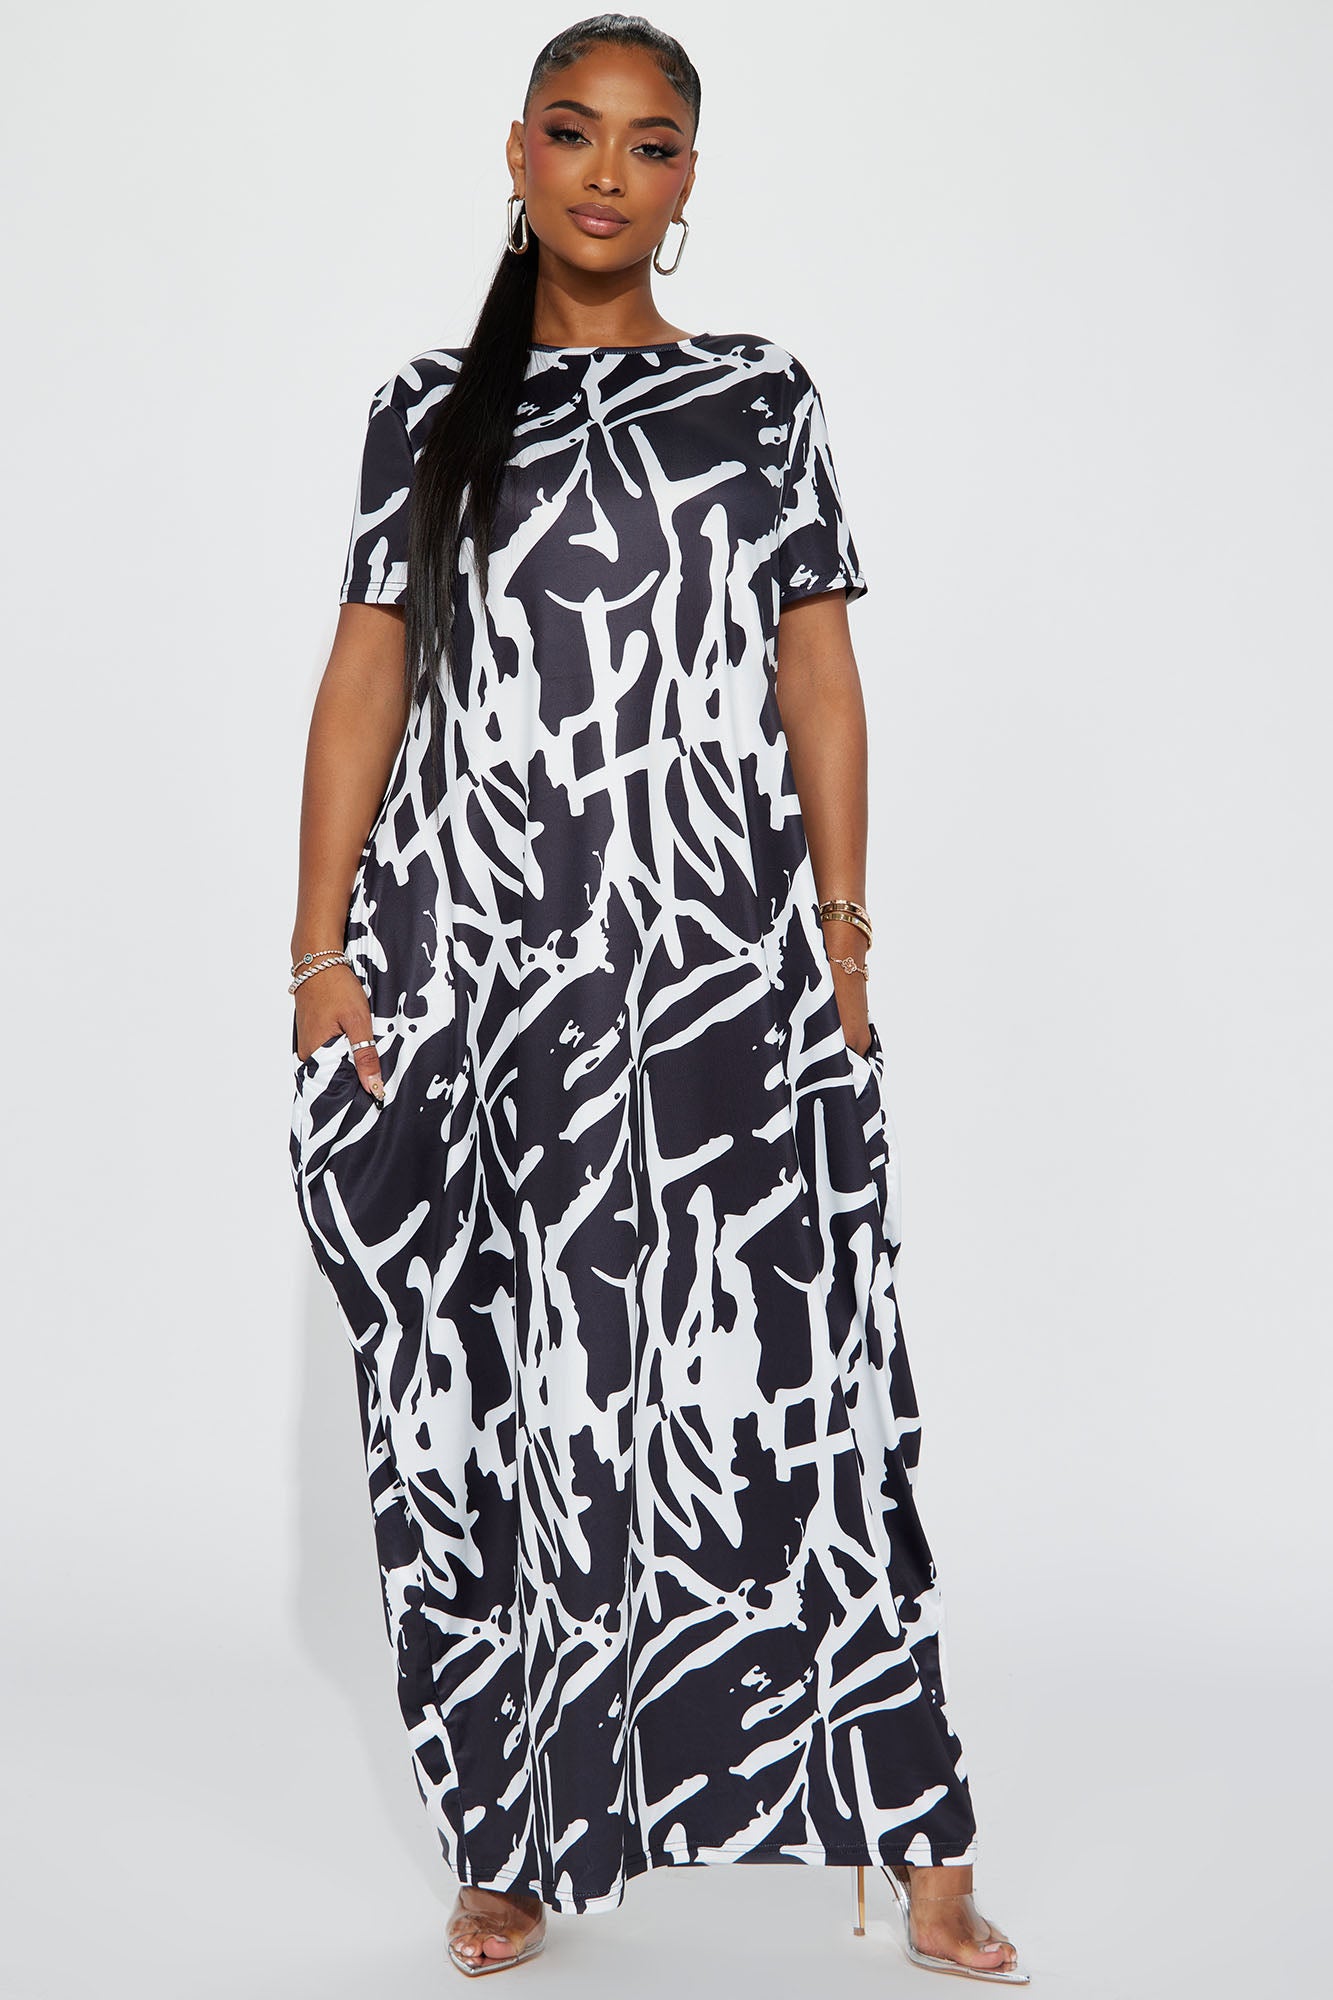 20+ Black And White Abstract Dress